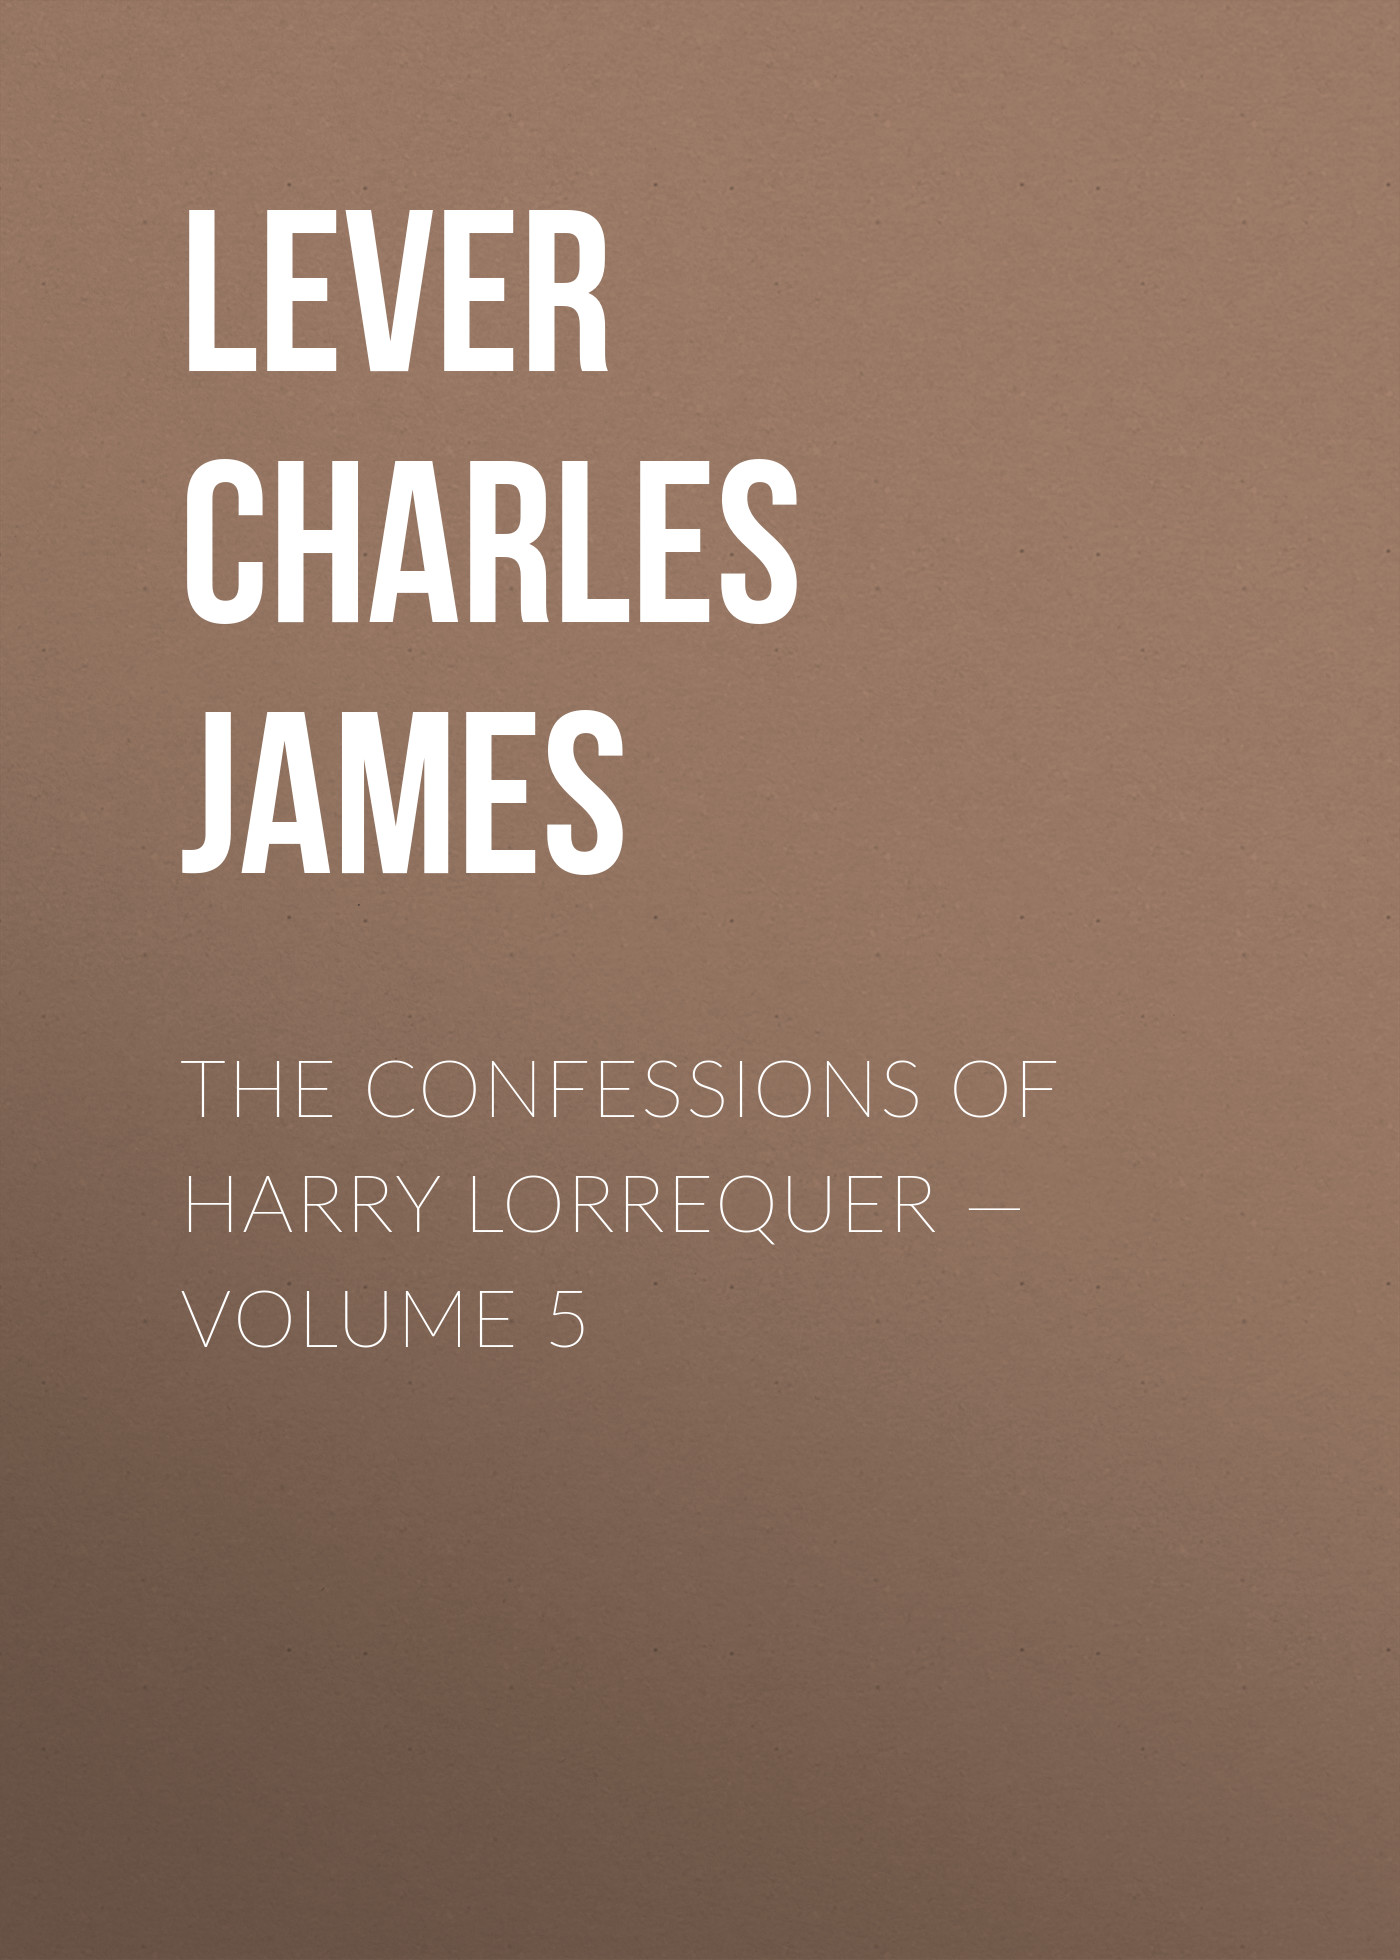 The Confessions of Harry Lorrequer— Volume 5